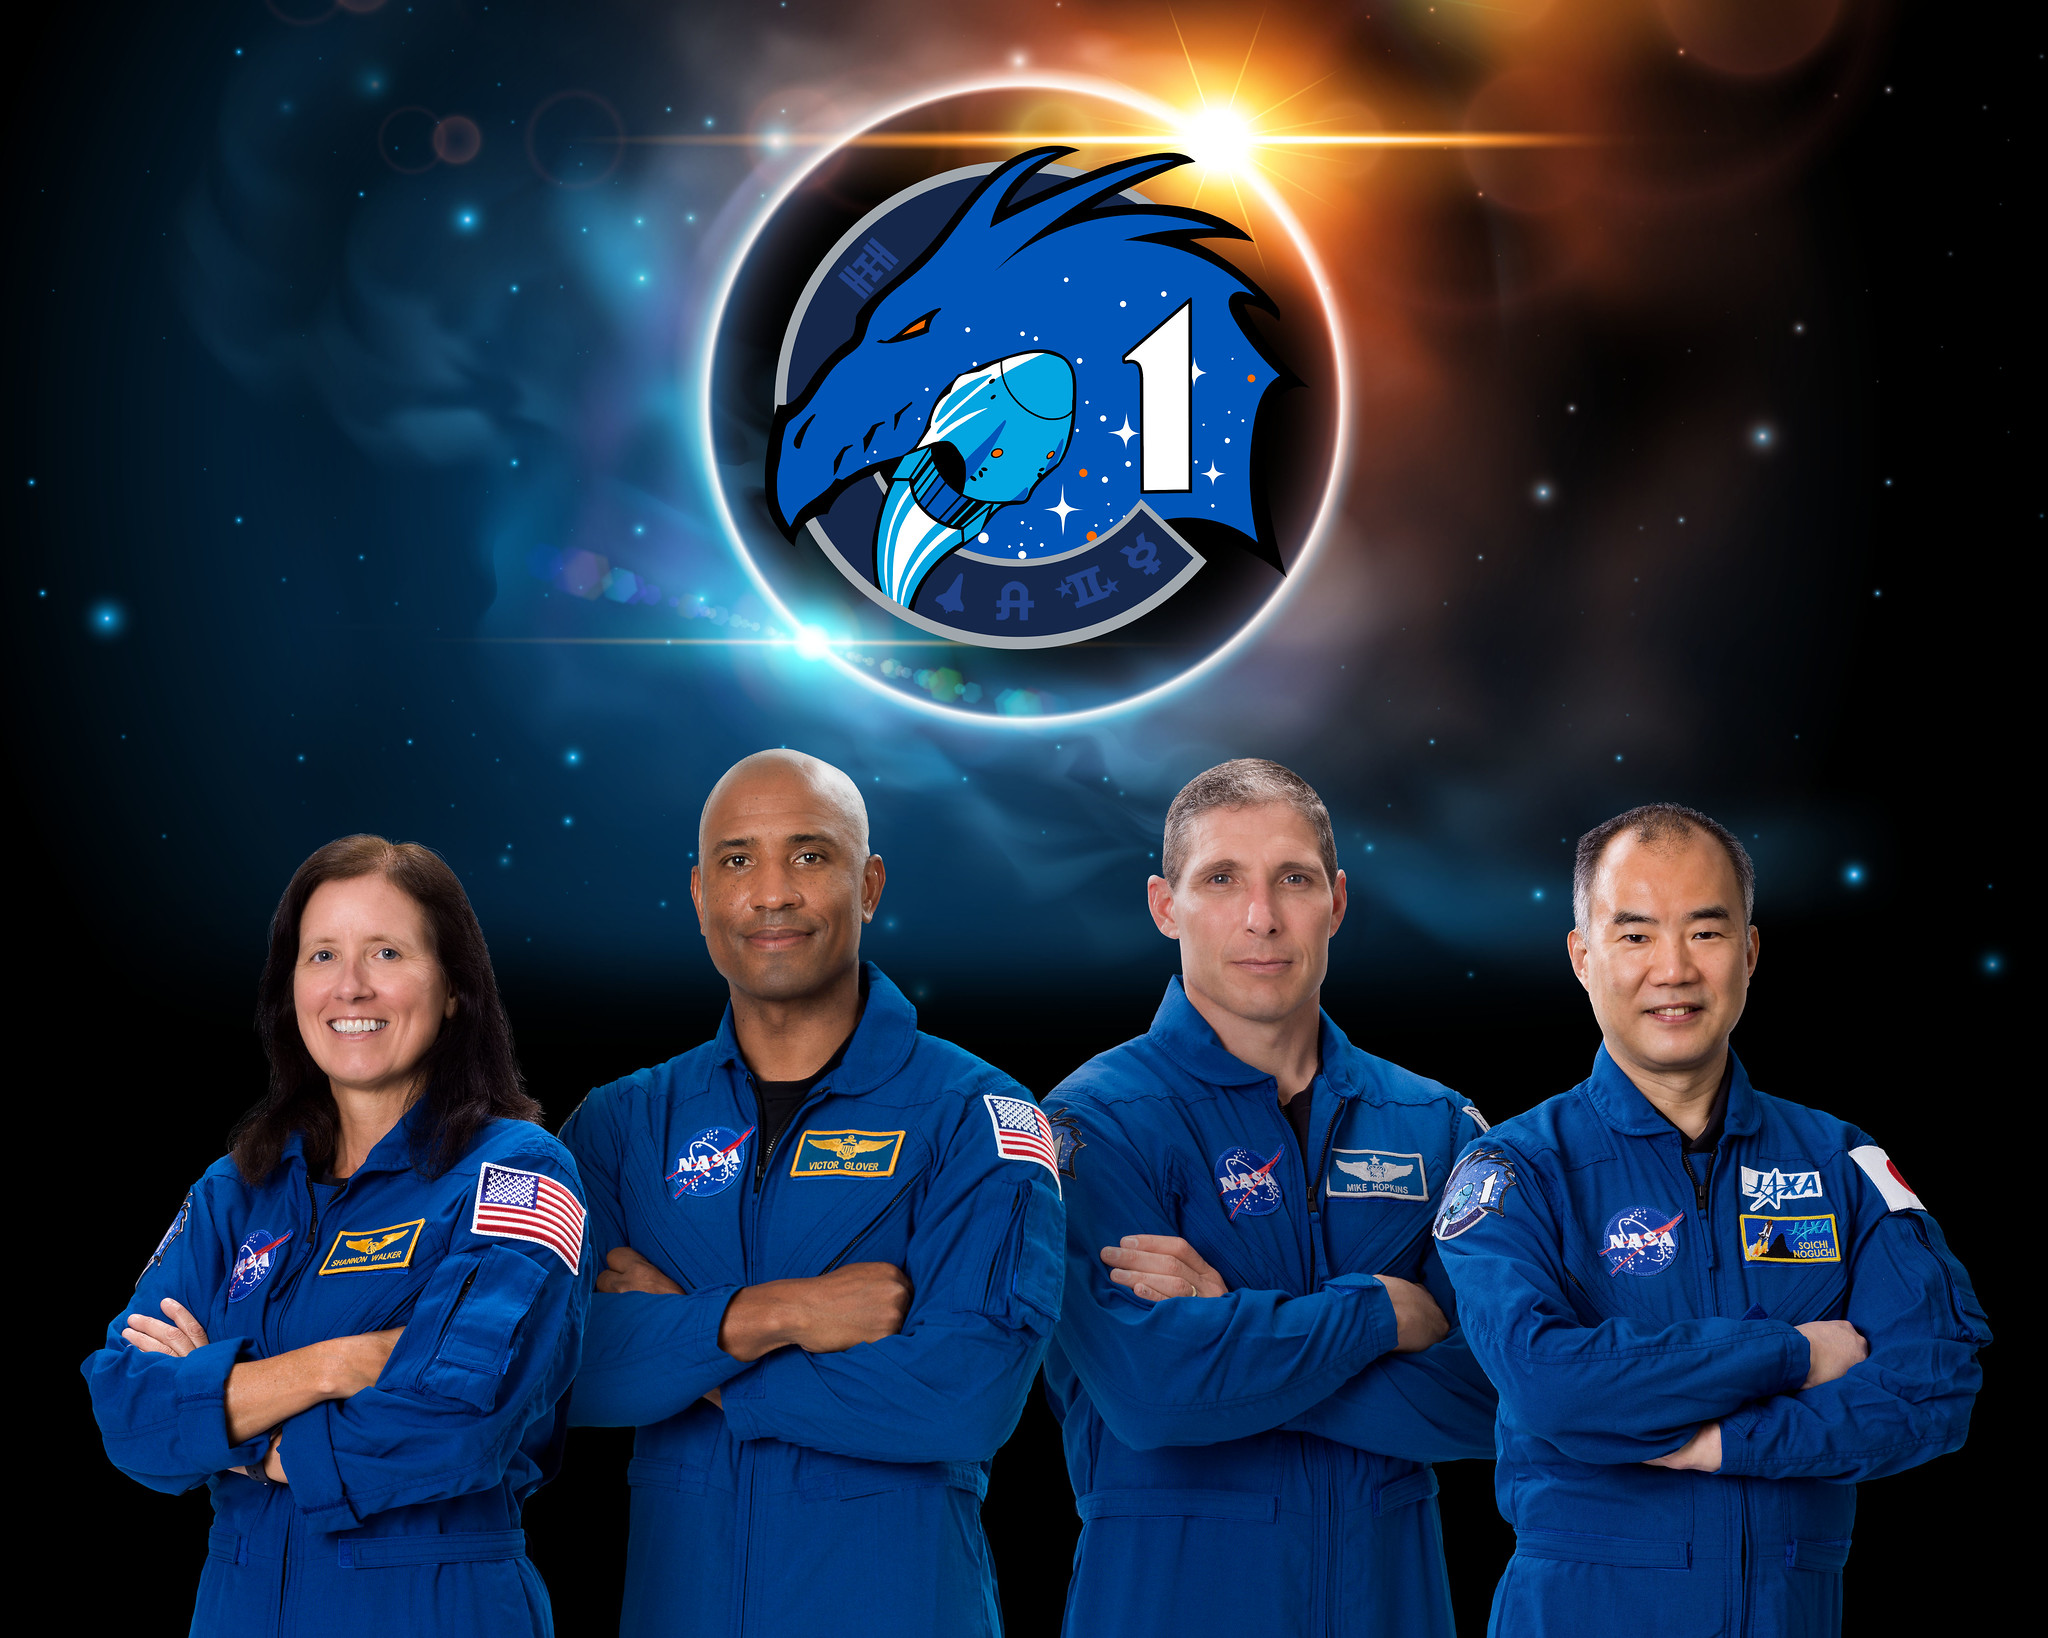 The SpaceX Crew-1 official crew portrait with (from left) Shannon Walker, Victor Glover, Mike Hopkins, and Soichi Noguchi 